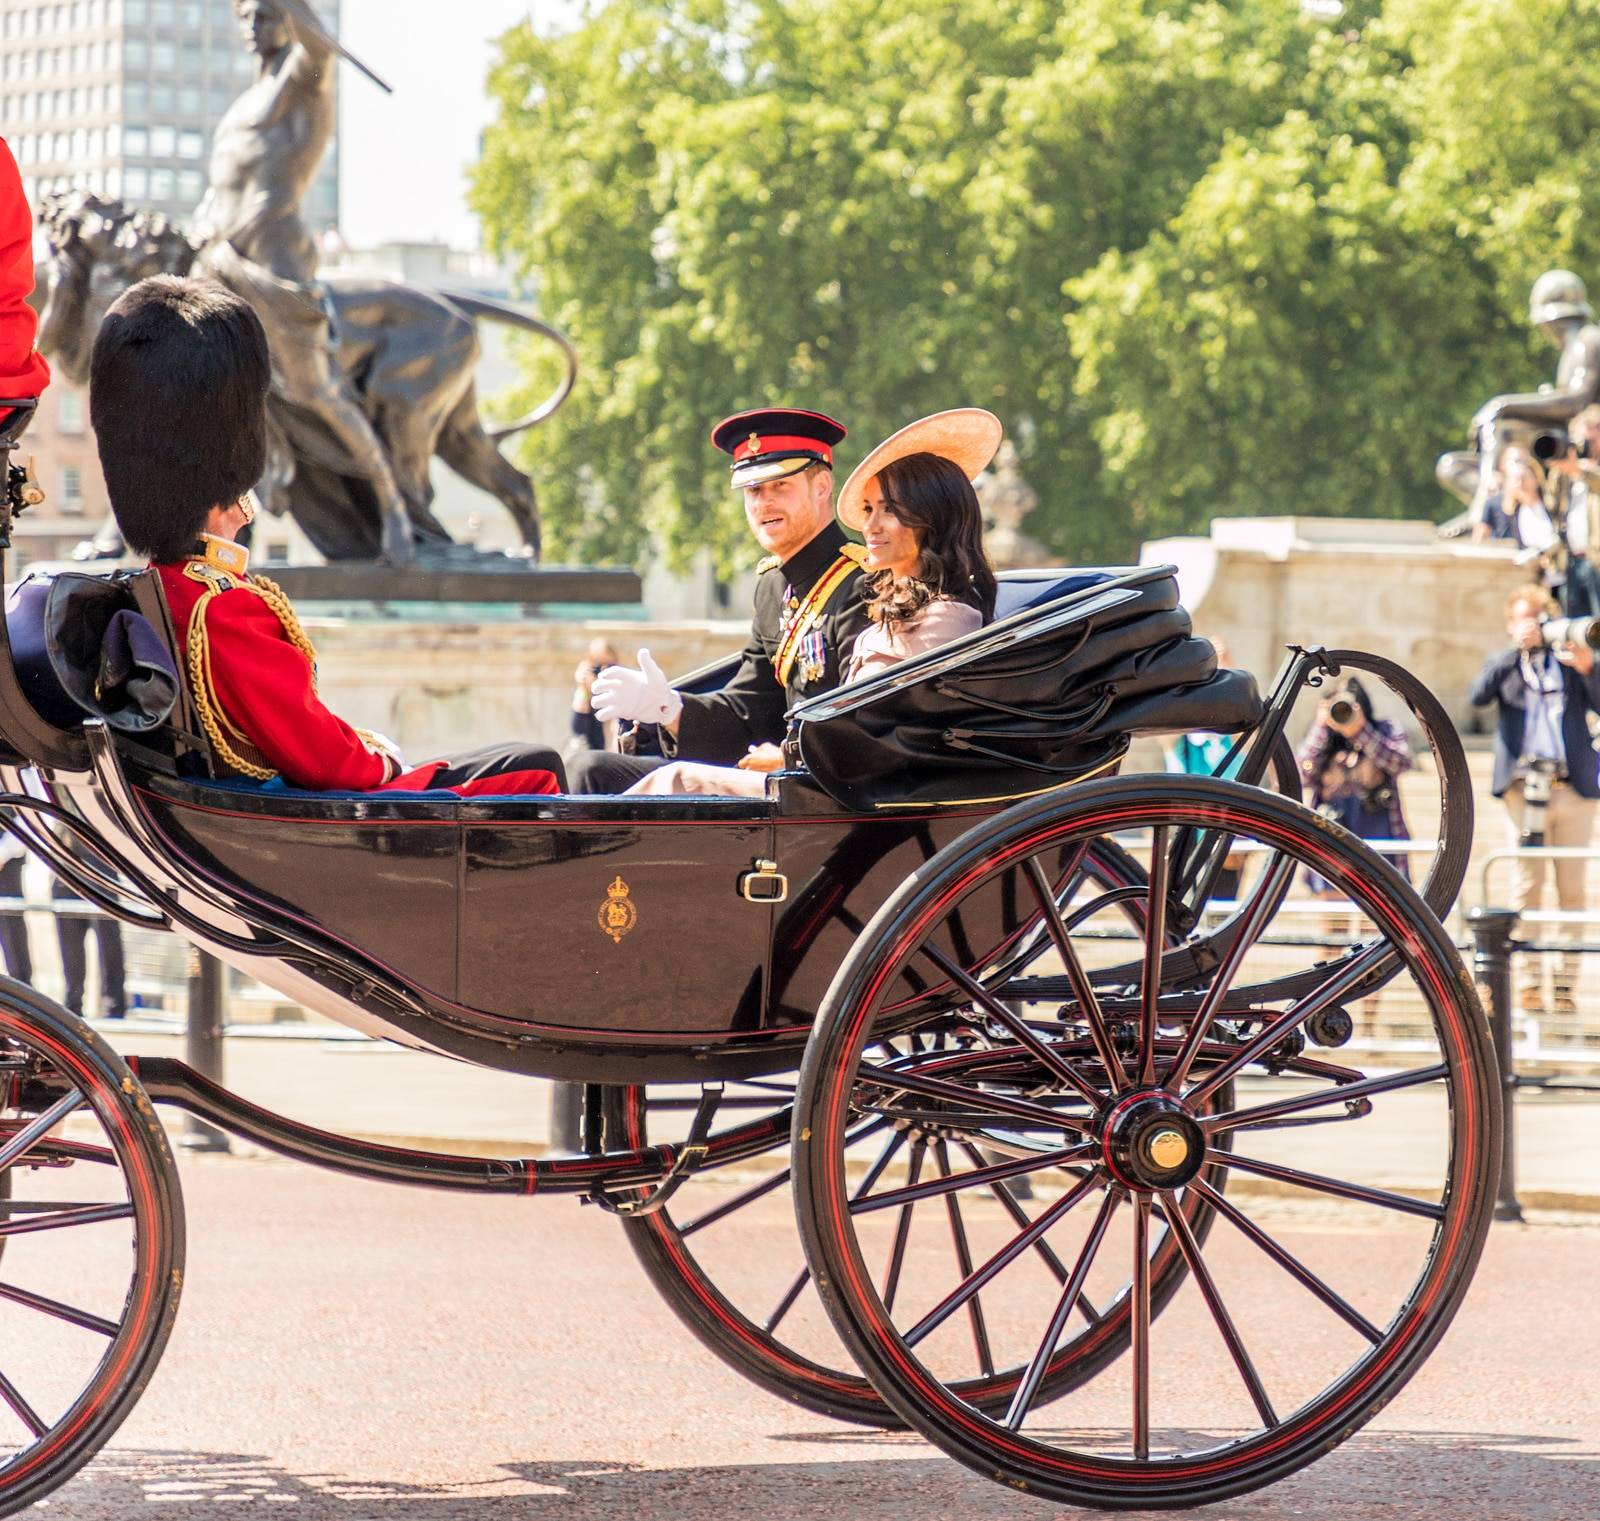 A view of the royal carriage